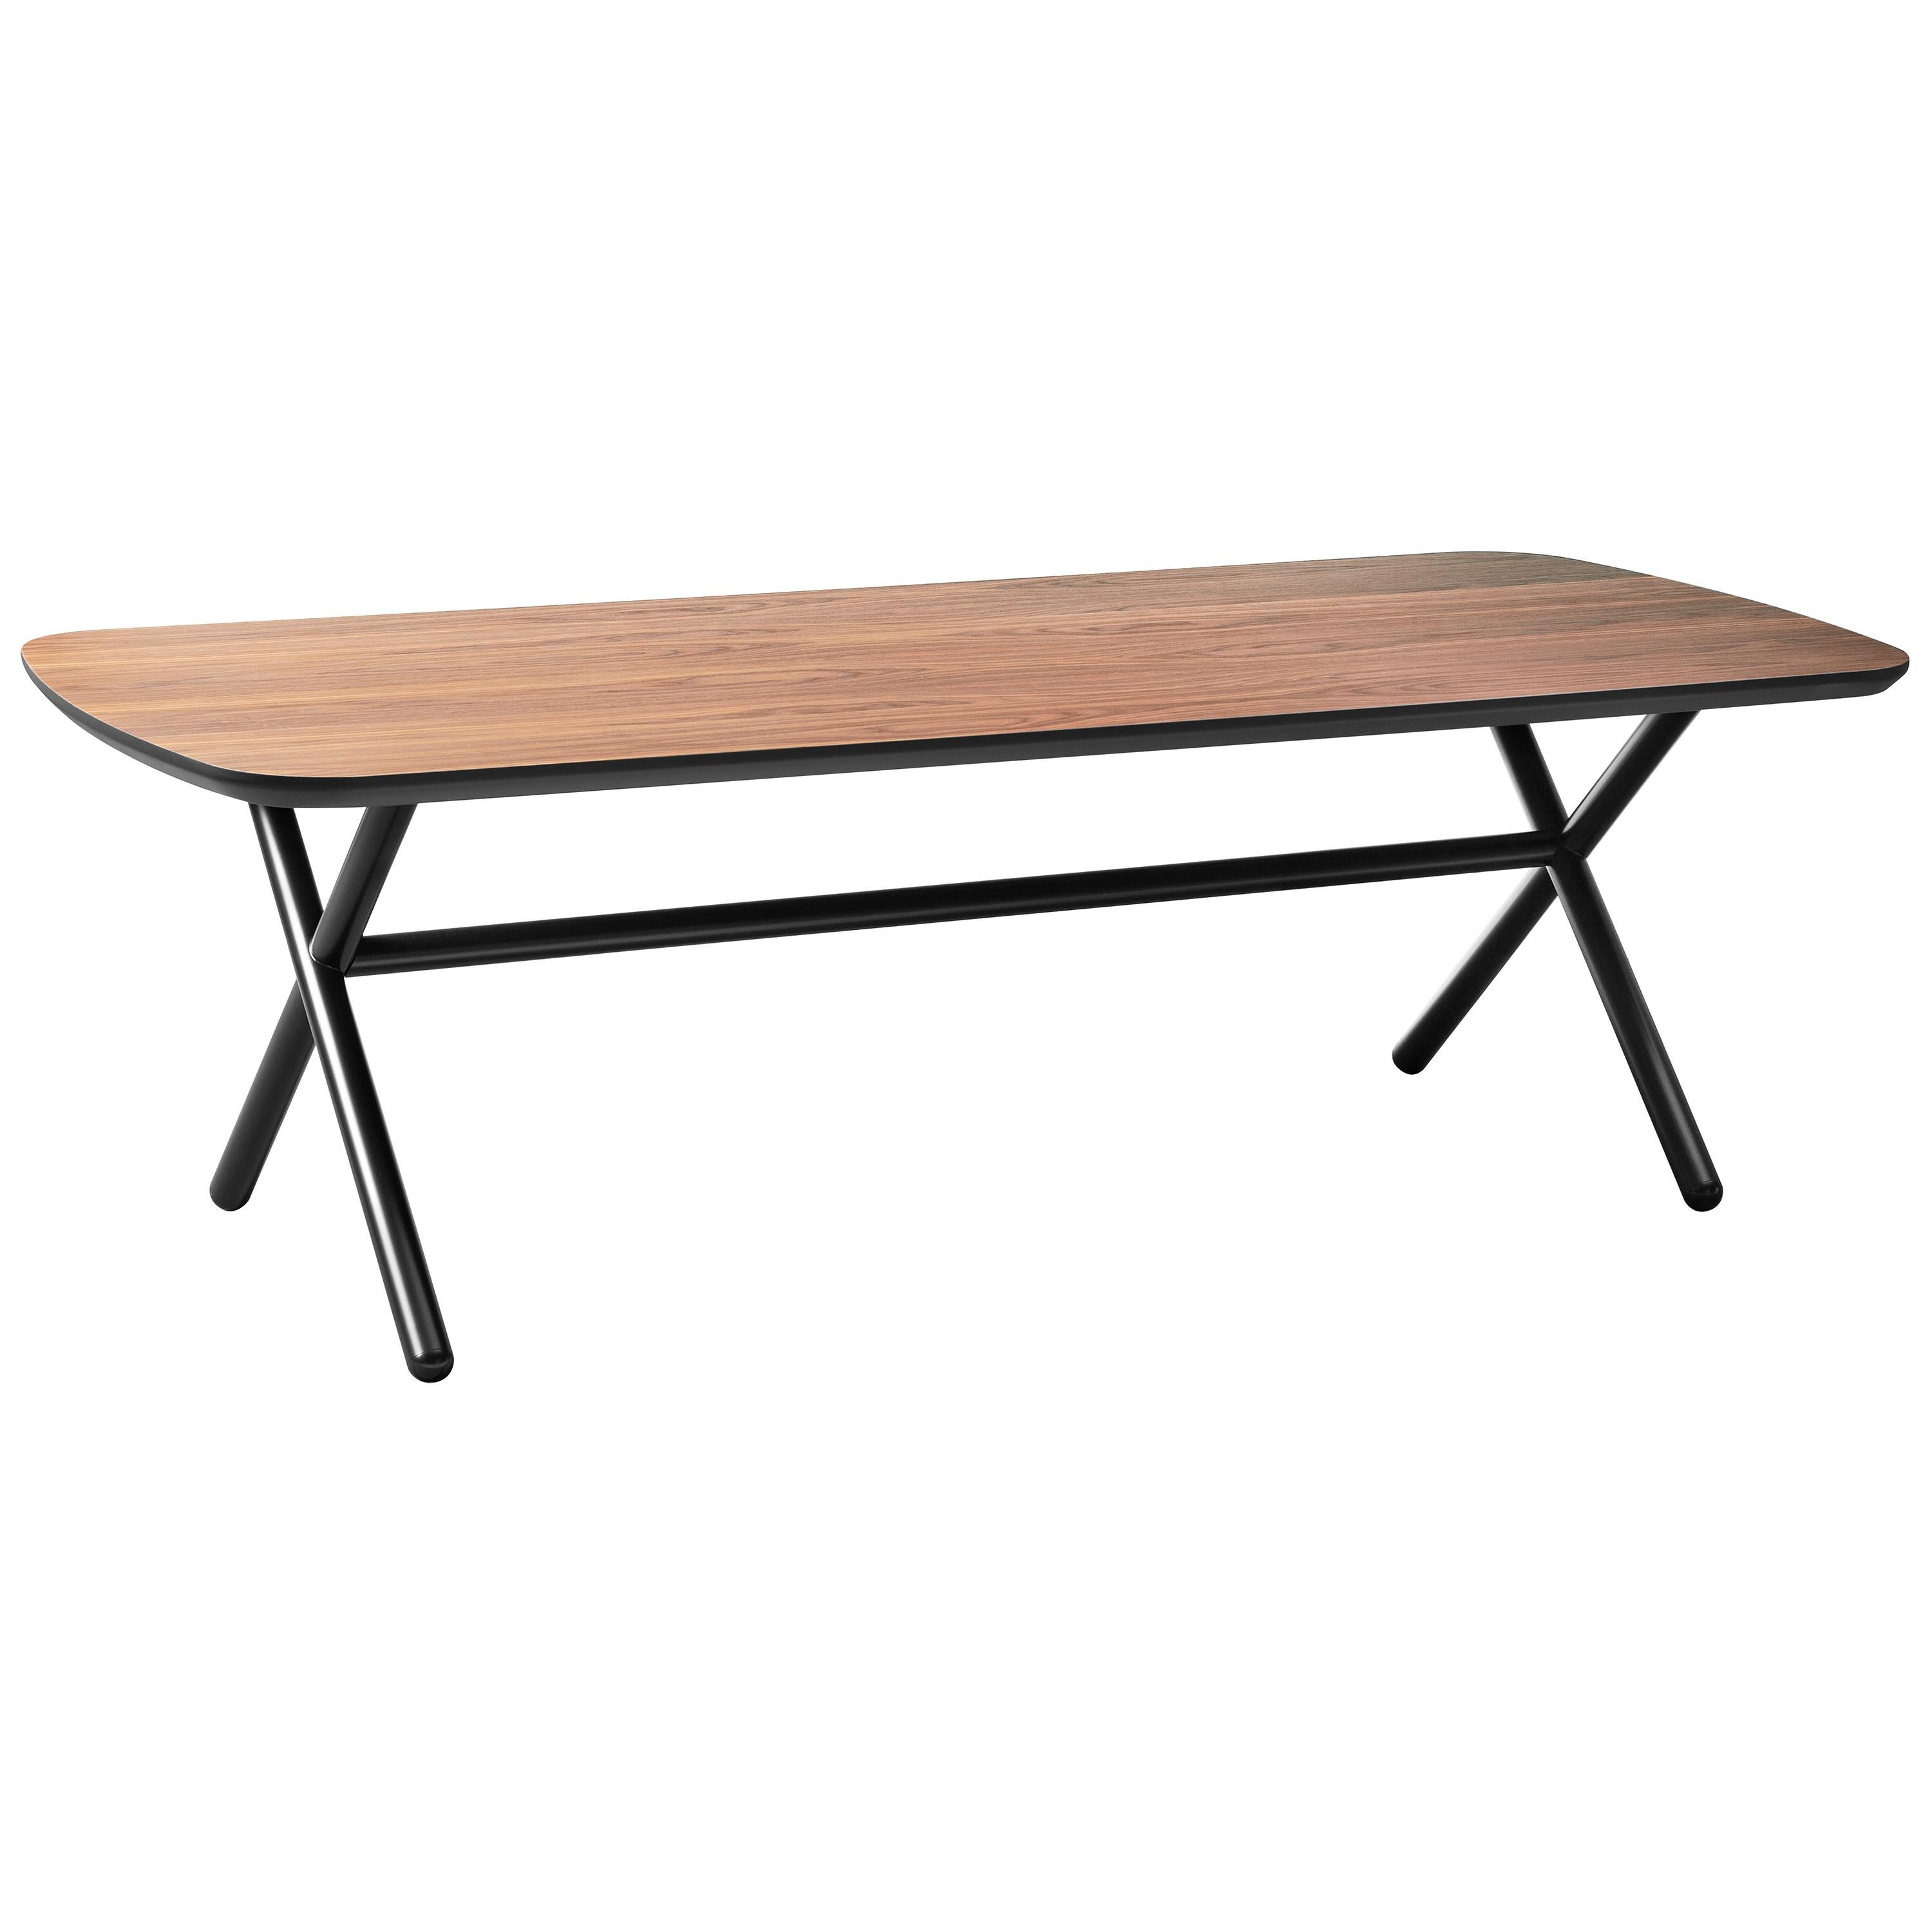 For Sale: Black (Black Lacquer) Émile Medium Dining Table, by Paolo Cappello